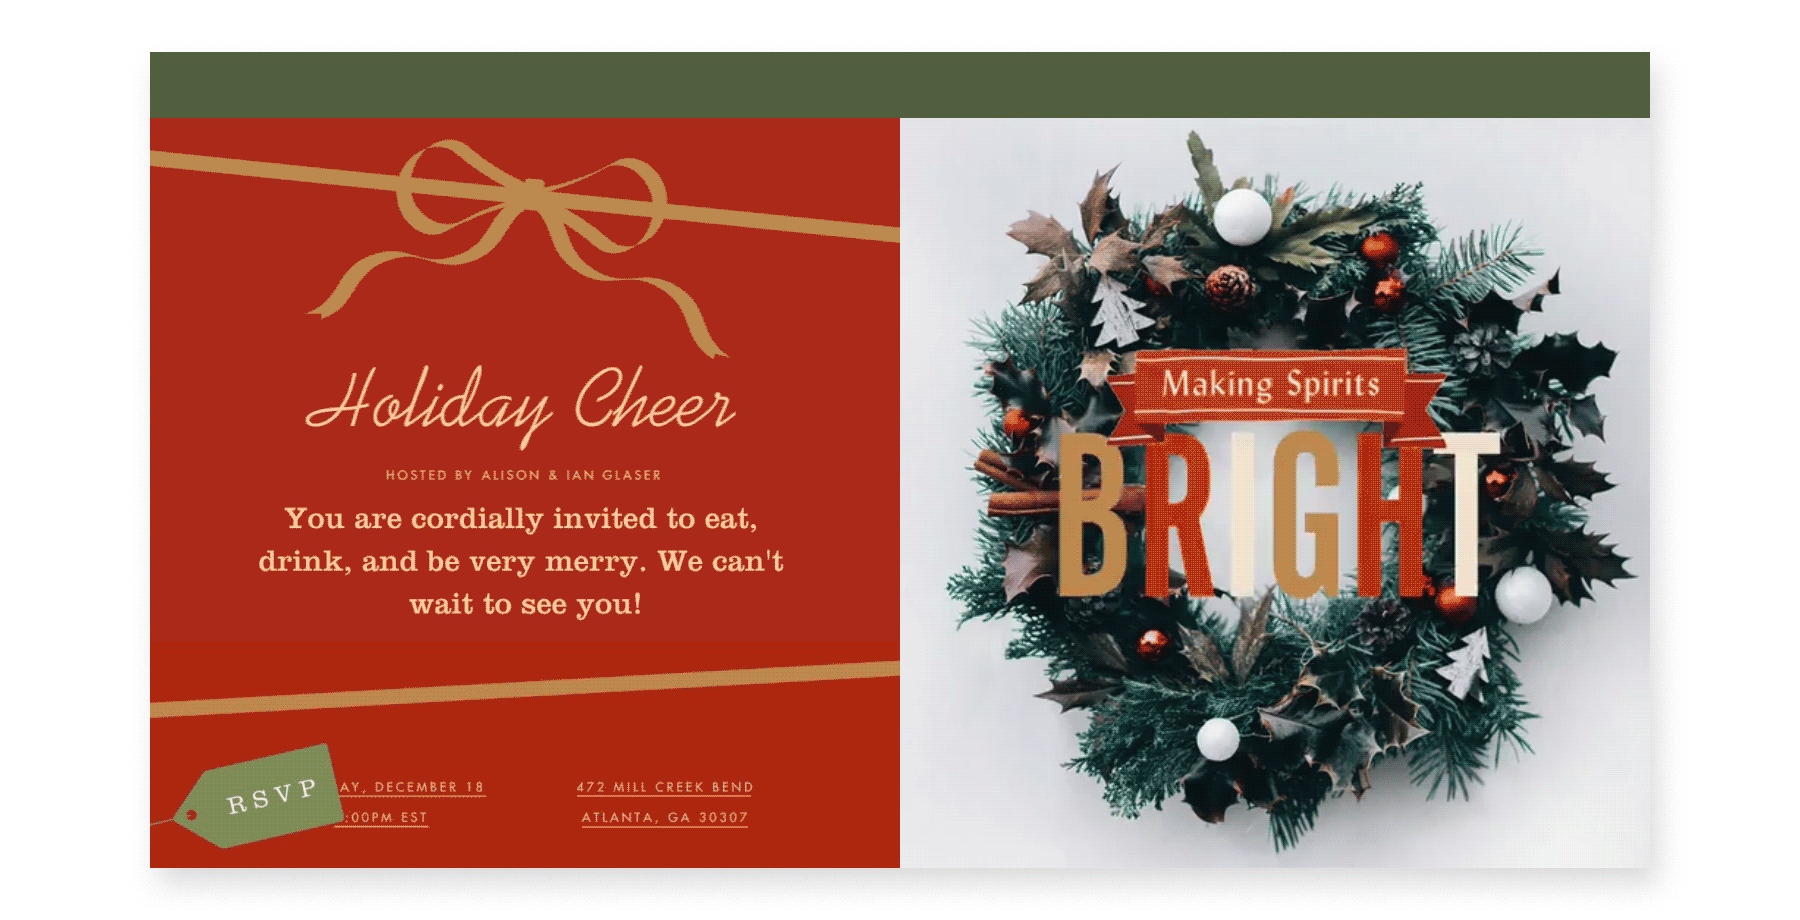 An animated holiday party invite that features a wreath and the text “Making spirits bright.”